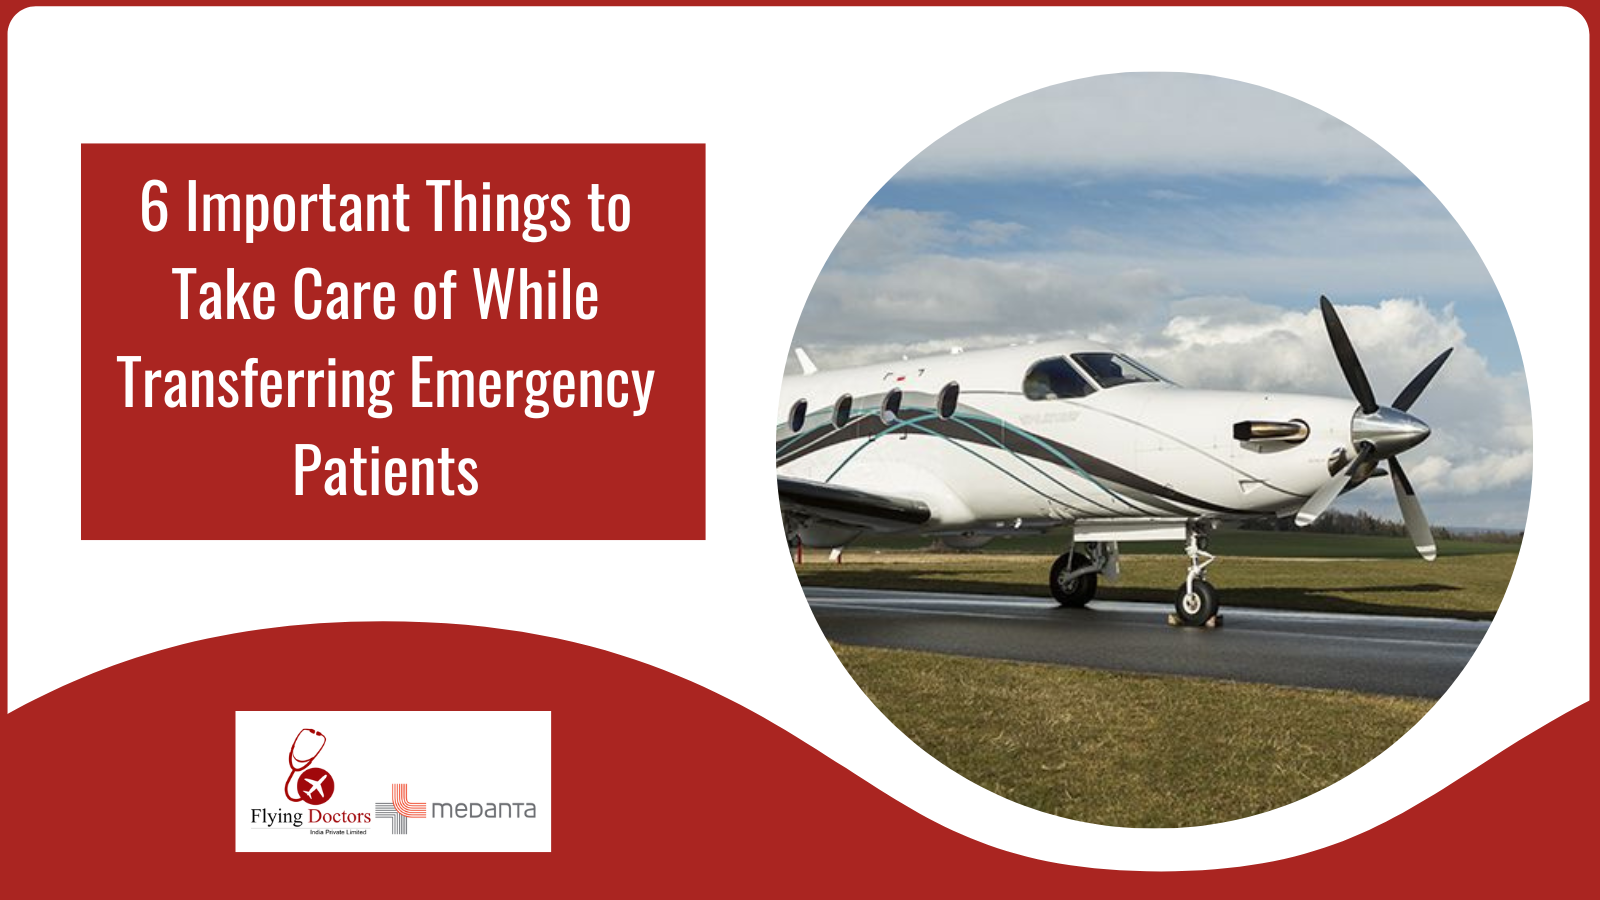 6 Important Things to Take Care of While Transferring Emergency Patients